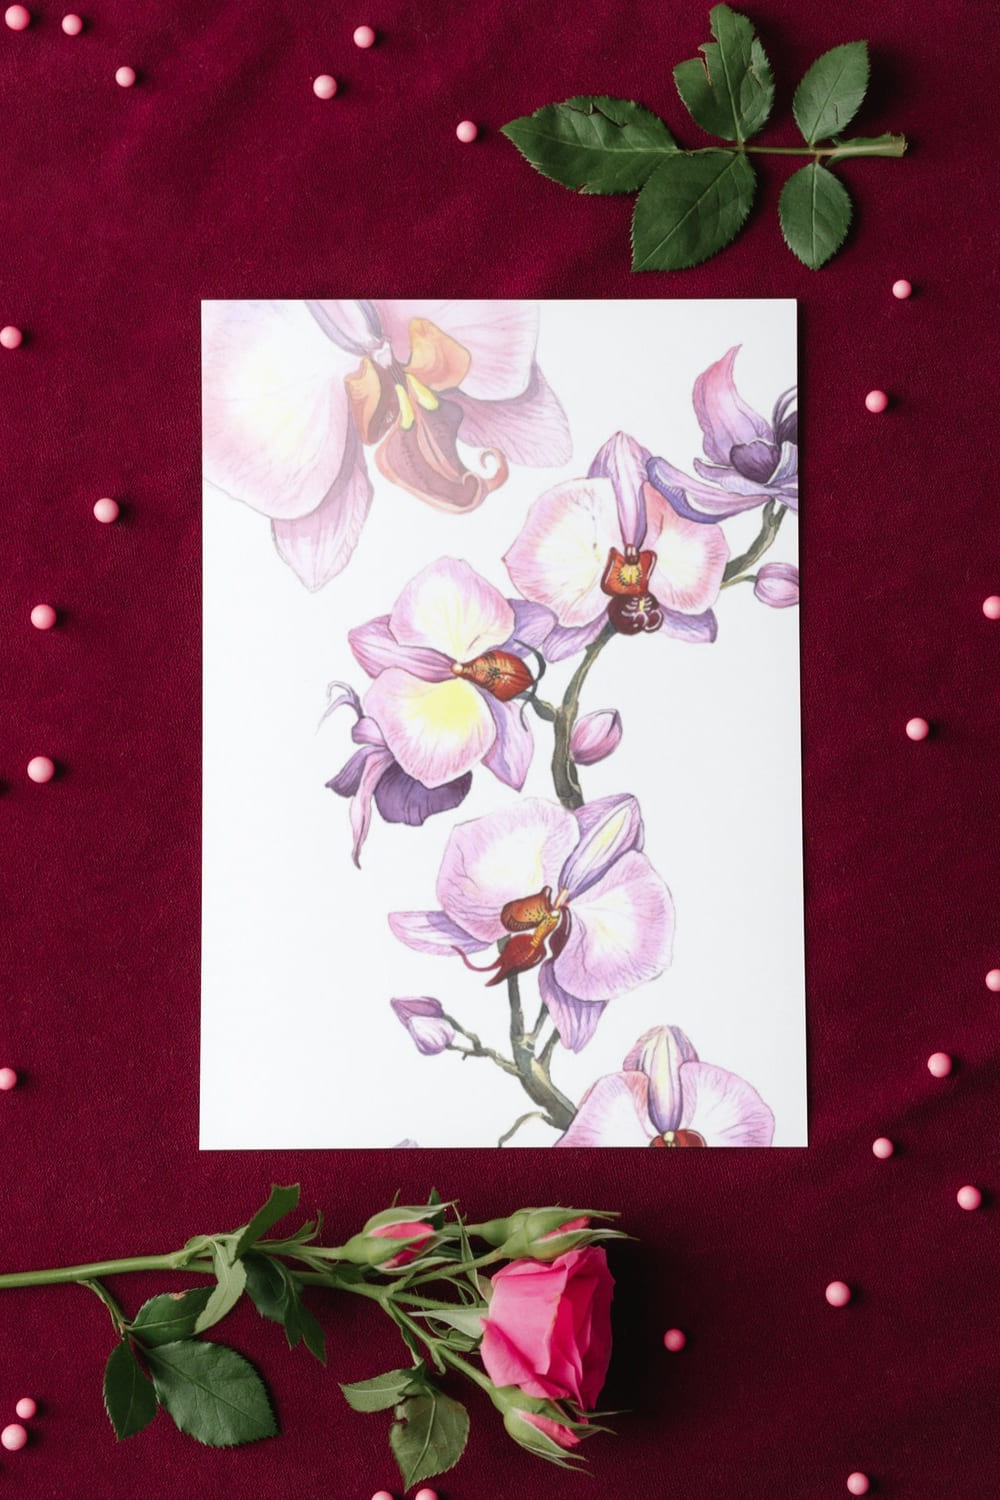 The handpicked orchids have been carefully color corrected to look elegant.